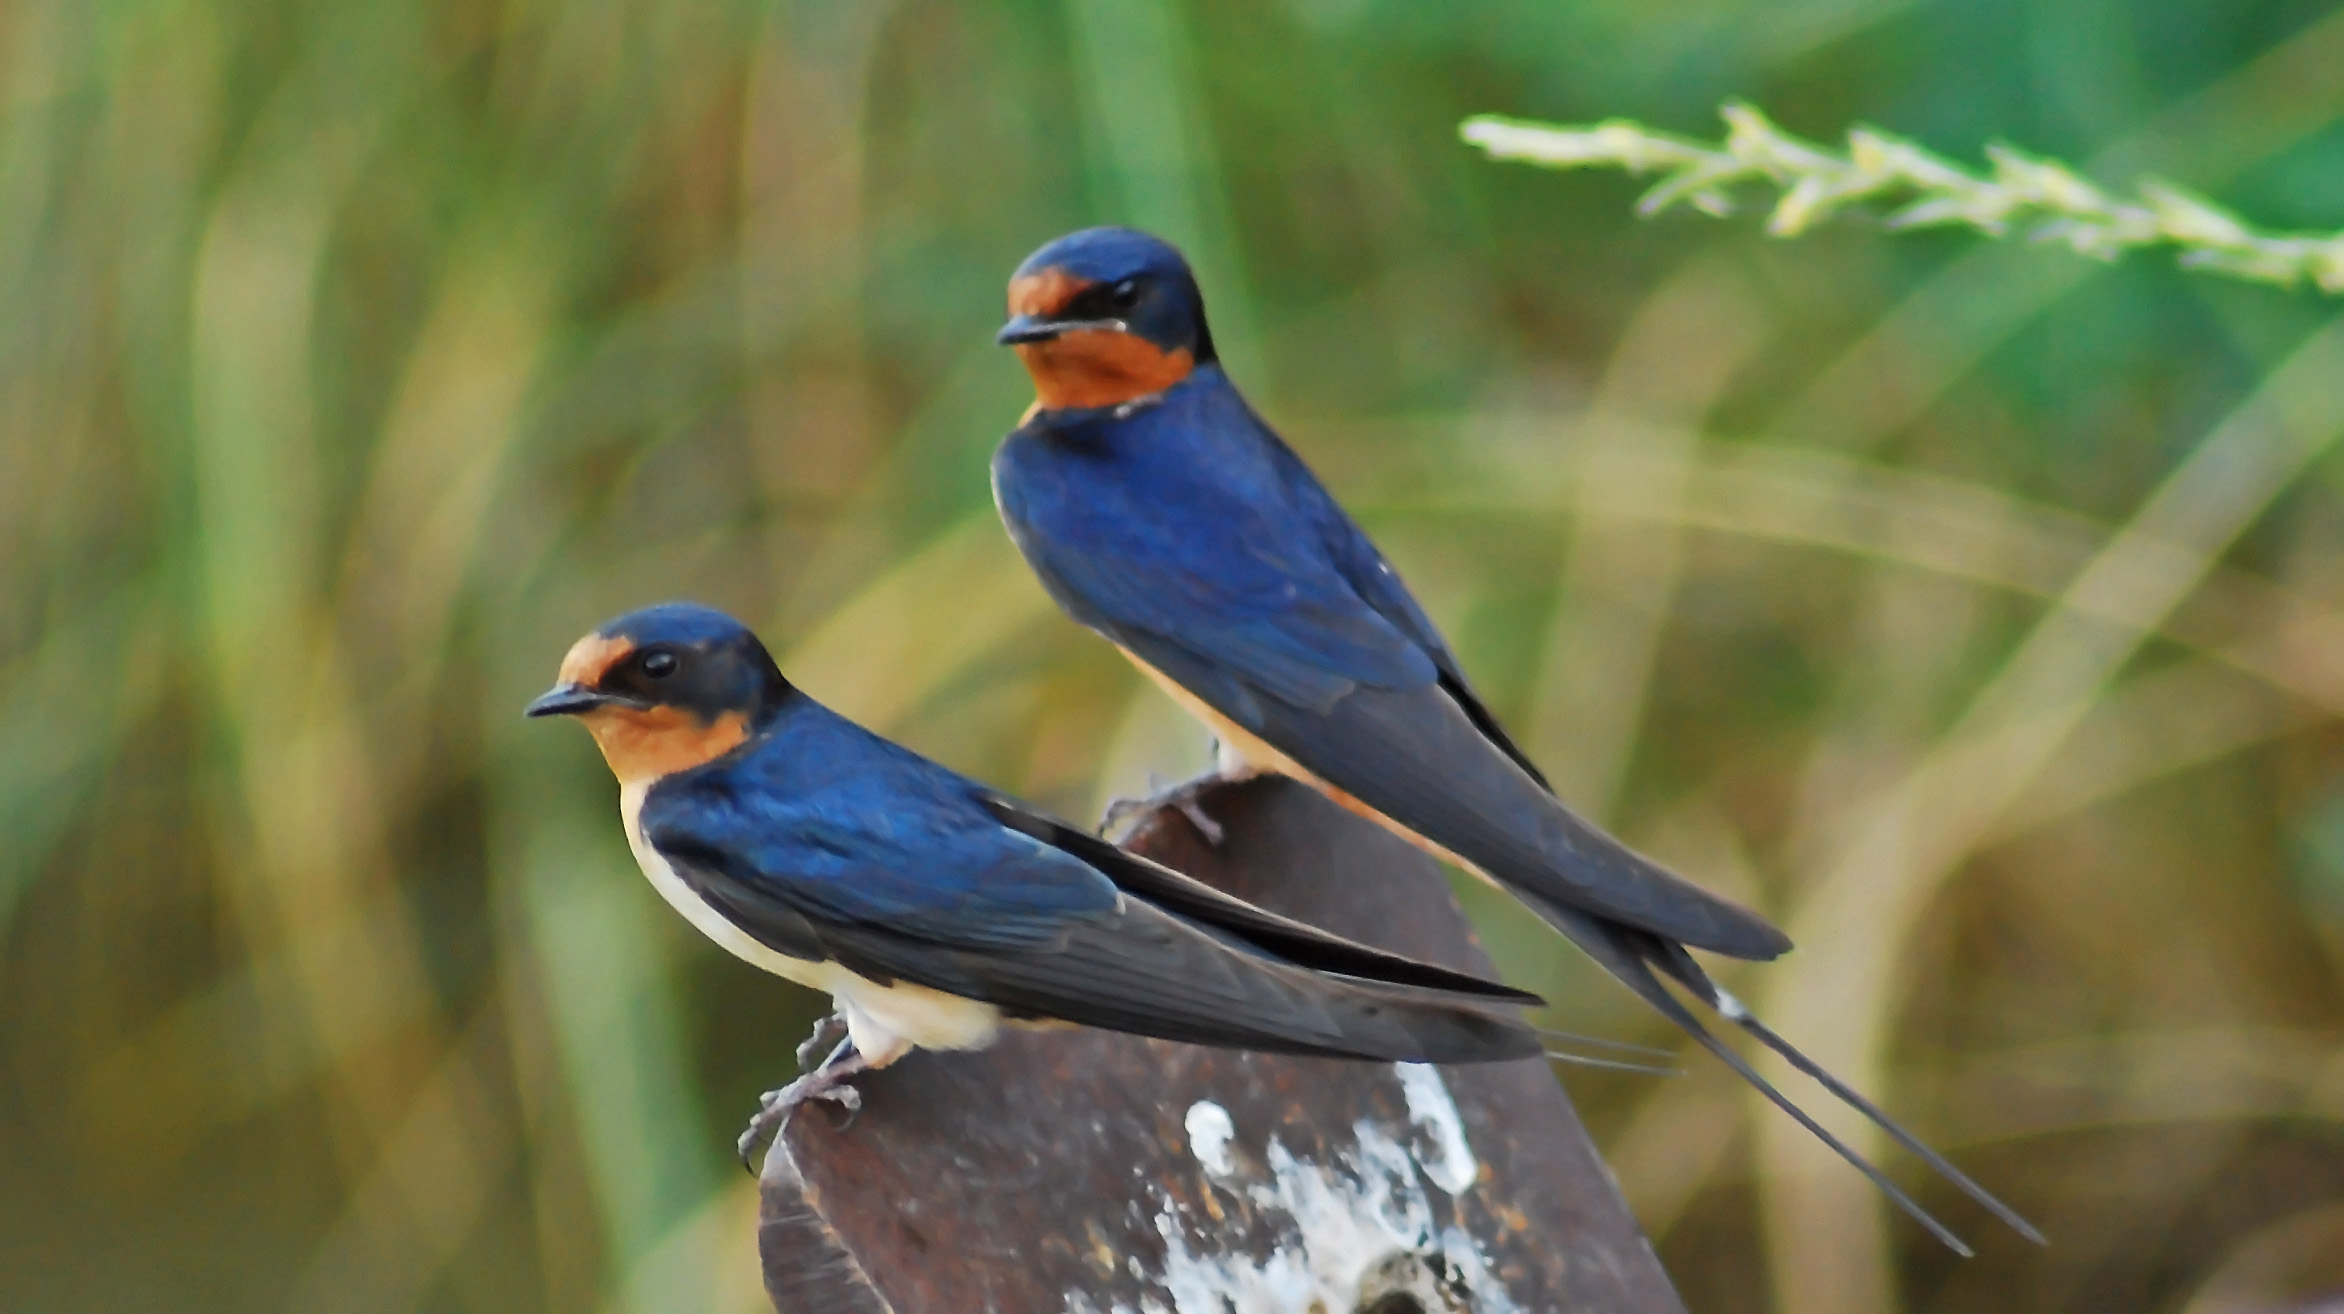 Two Barn Swallows Photo And Wallpaper All